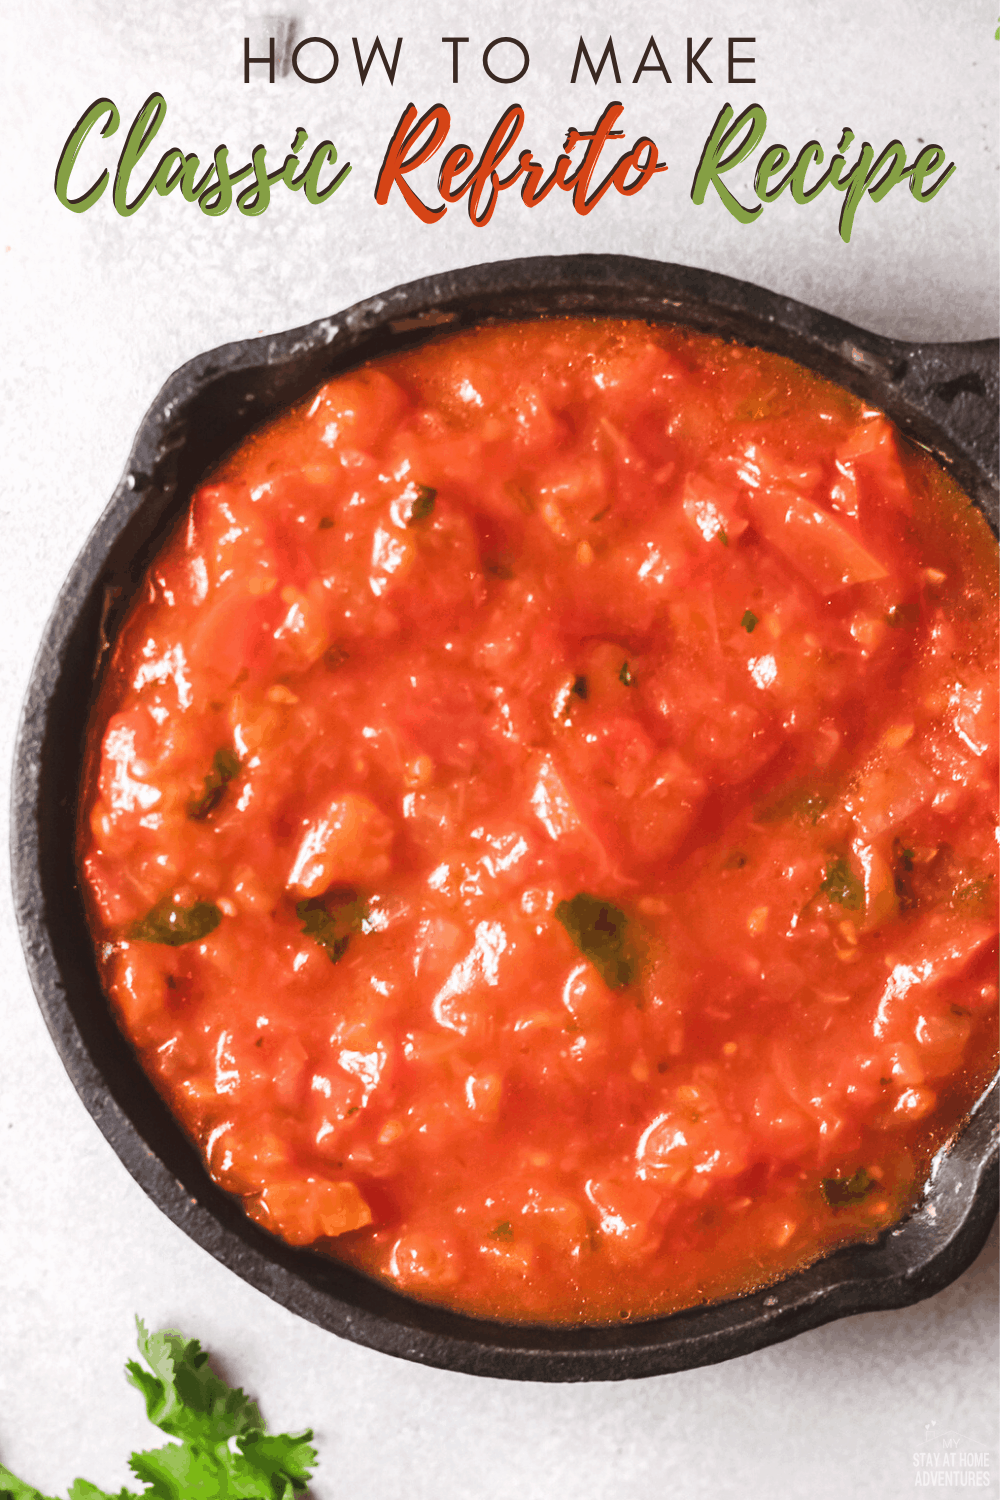 Learn all you need to know about making Classic refrito (with tomato sauce) or Refrito de Cebolla is a classic recipe from Latin America. #refrito #latinfood #hispanicfood #tomatobaserecipe via @mystayathome